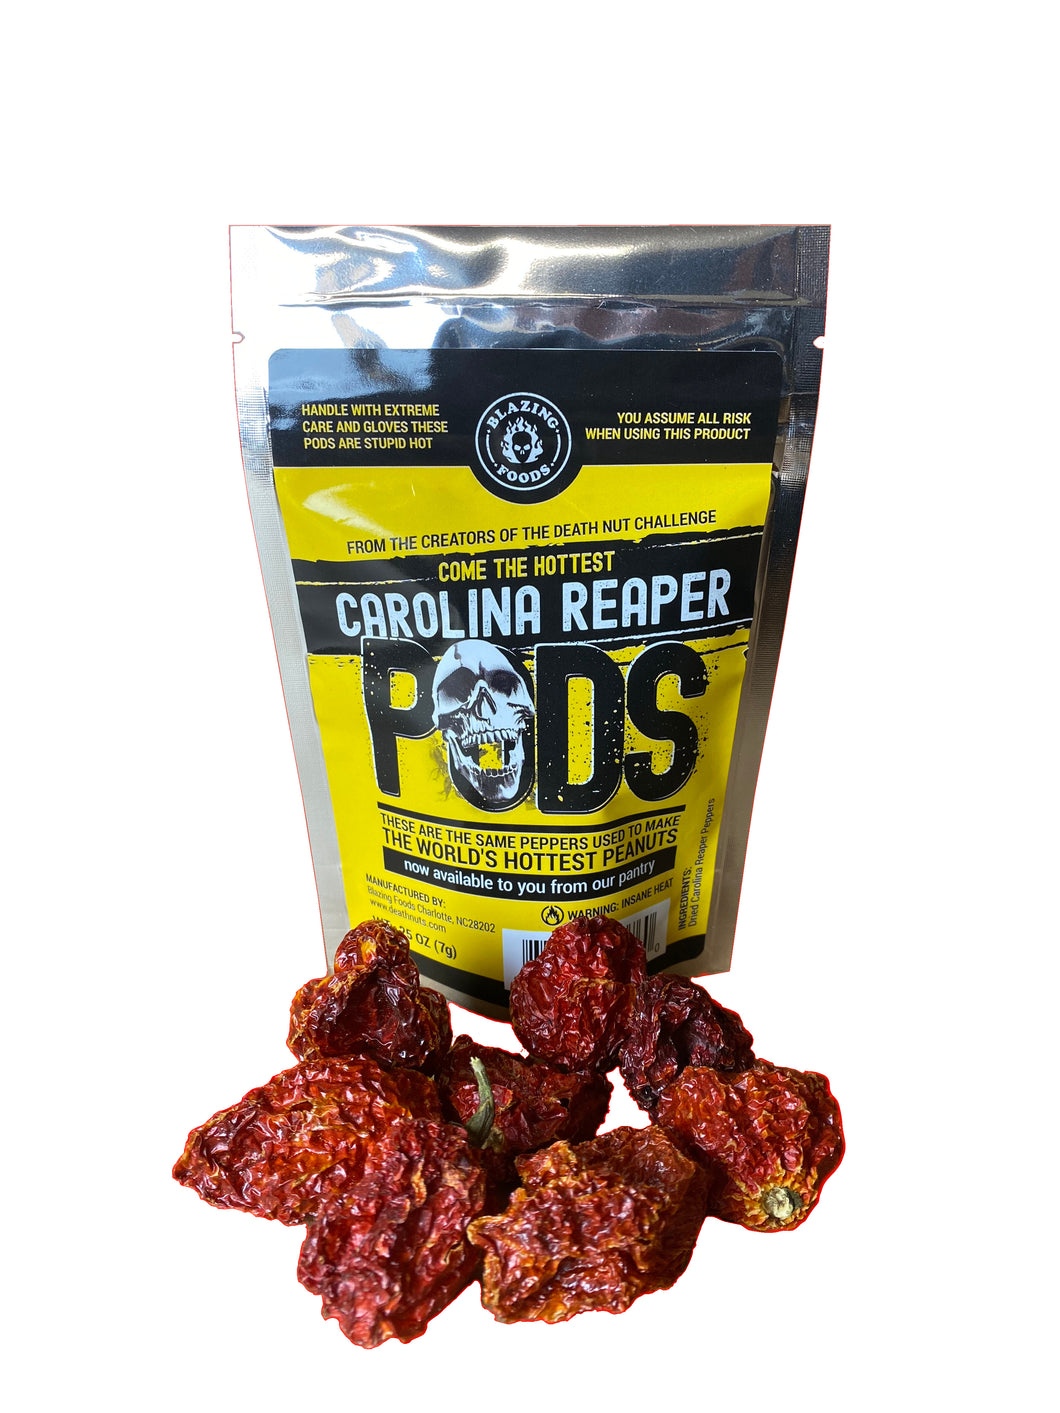 CAROLINA REAPER PEPPERS - WHOLE DRIED PODS